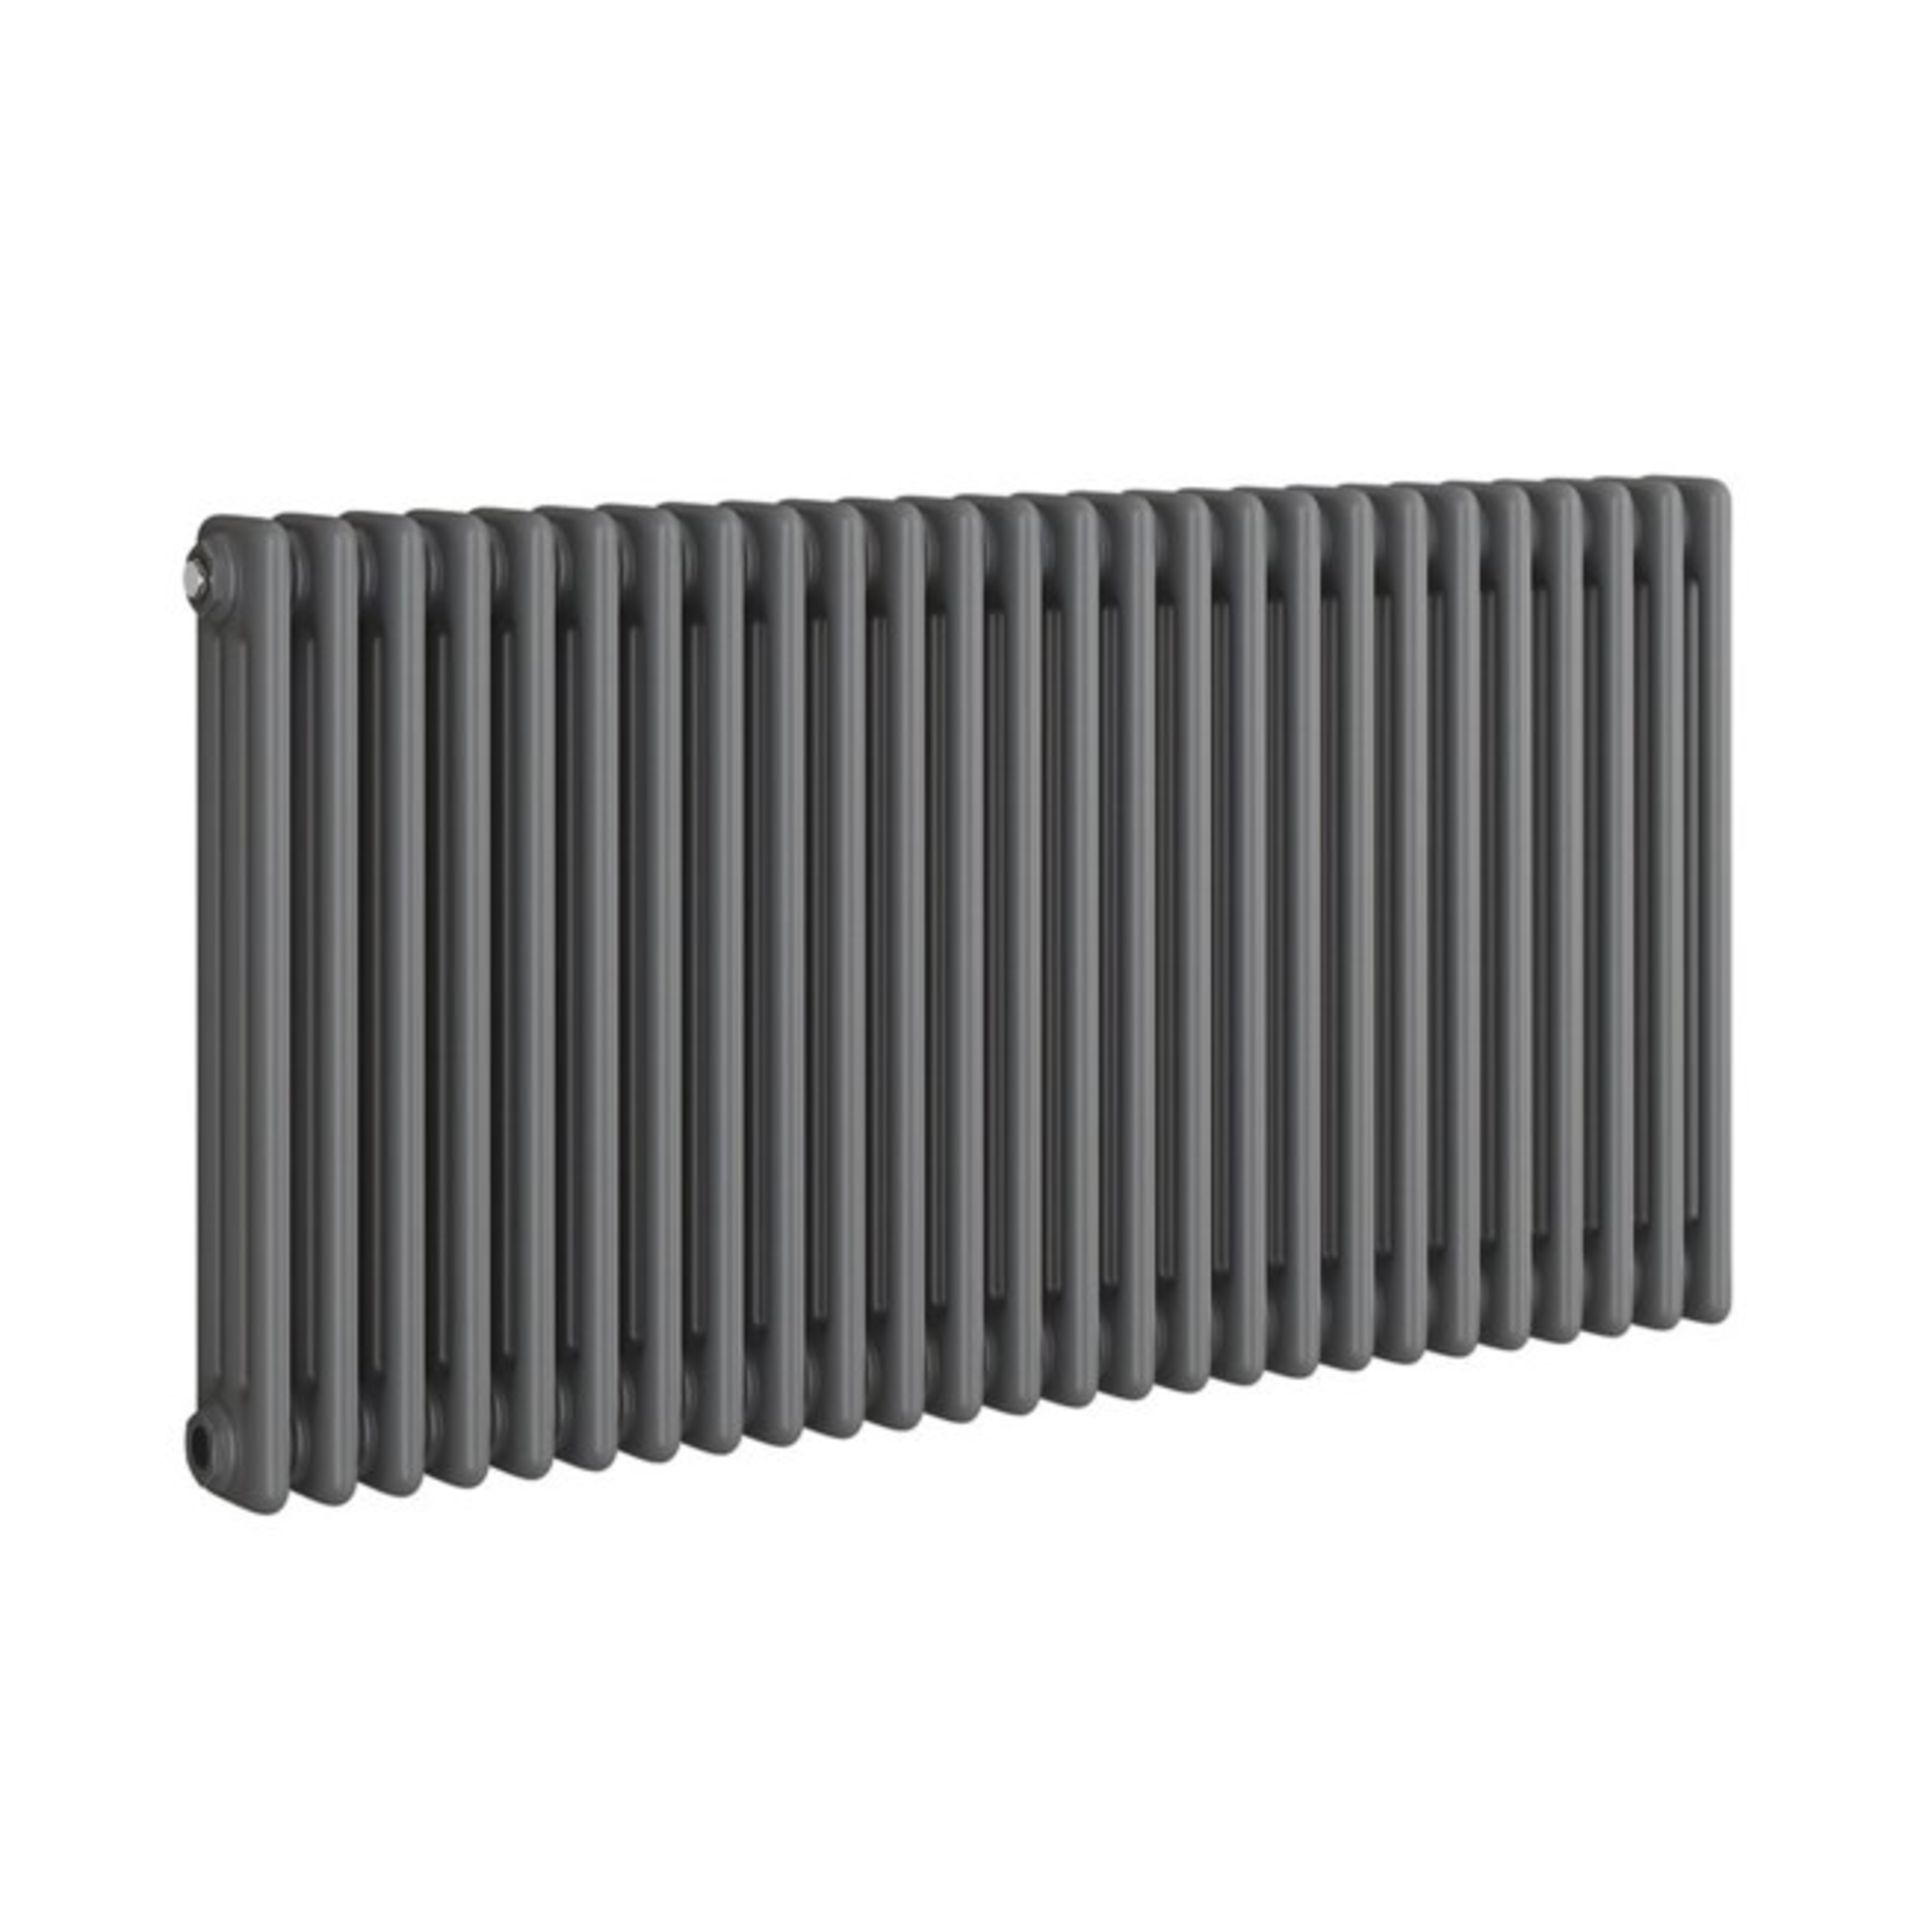 600x828mm Anthracite Double Panel Horizontal Colosseum Traditional Radiator.RCA563. RRP £542.... - Image 3 of 3